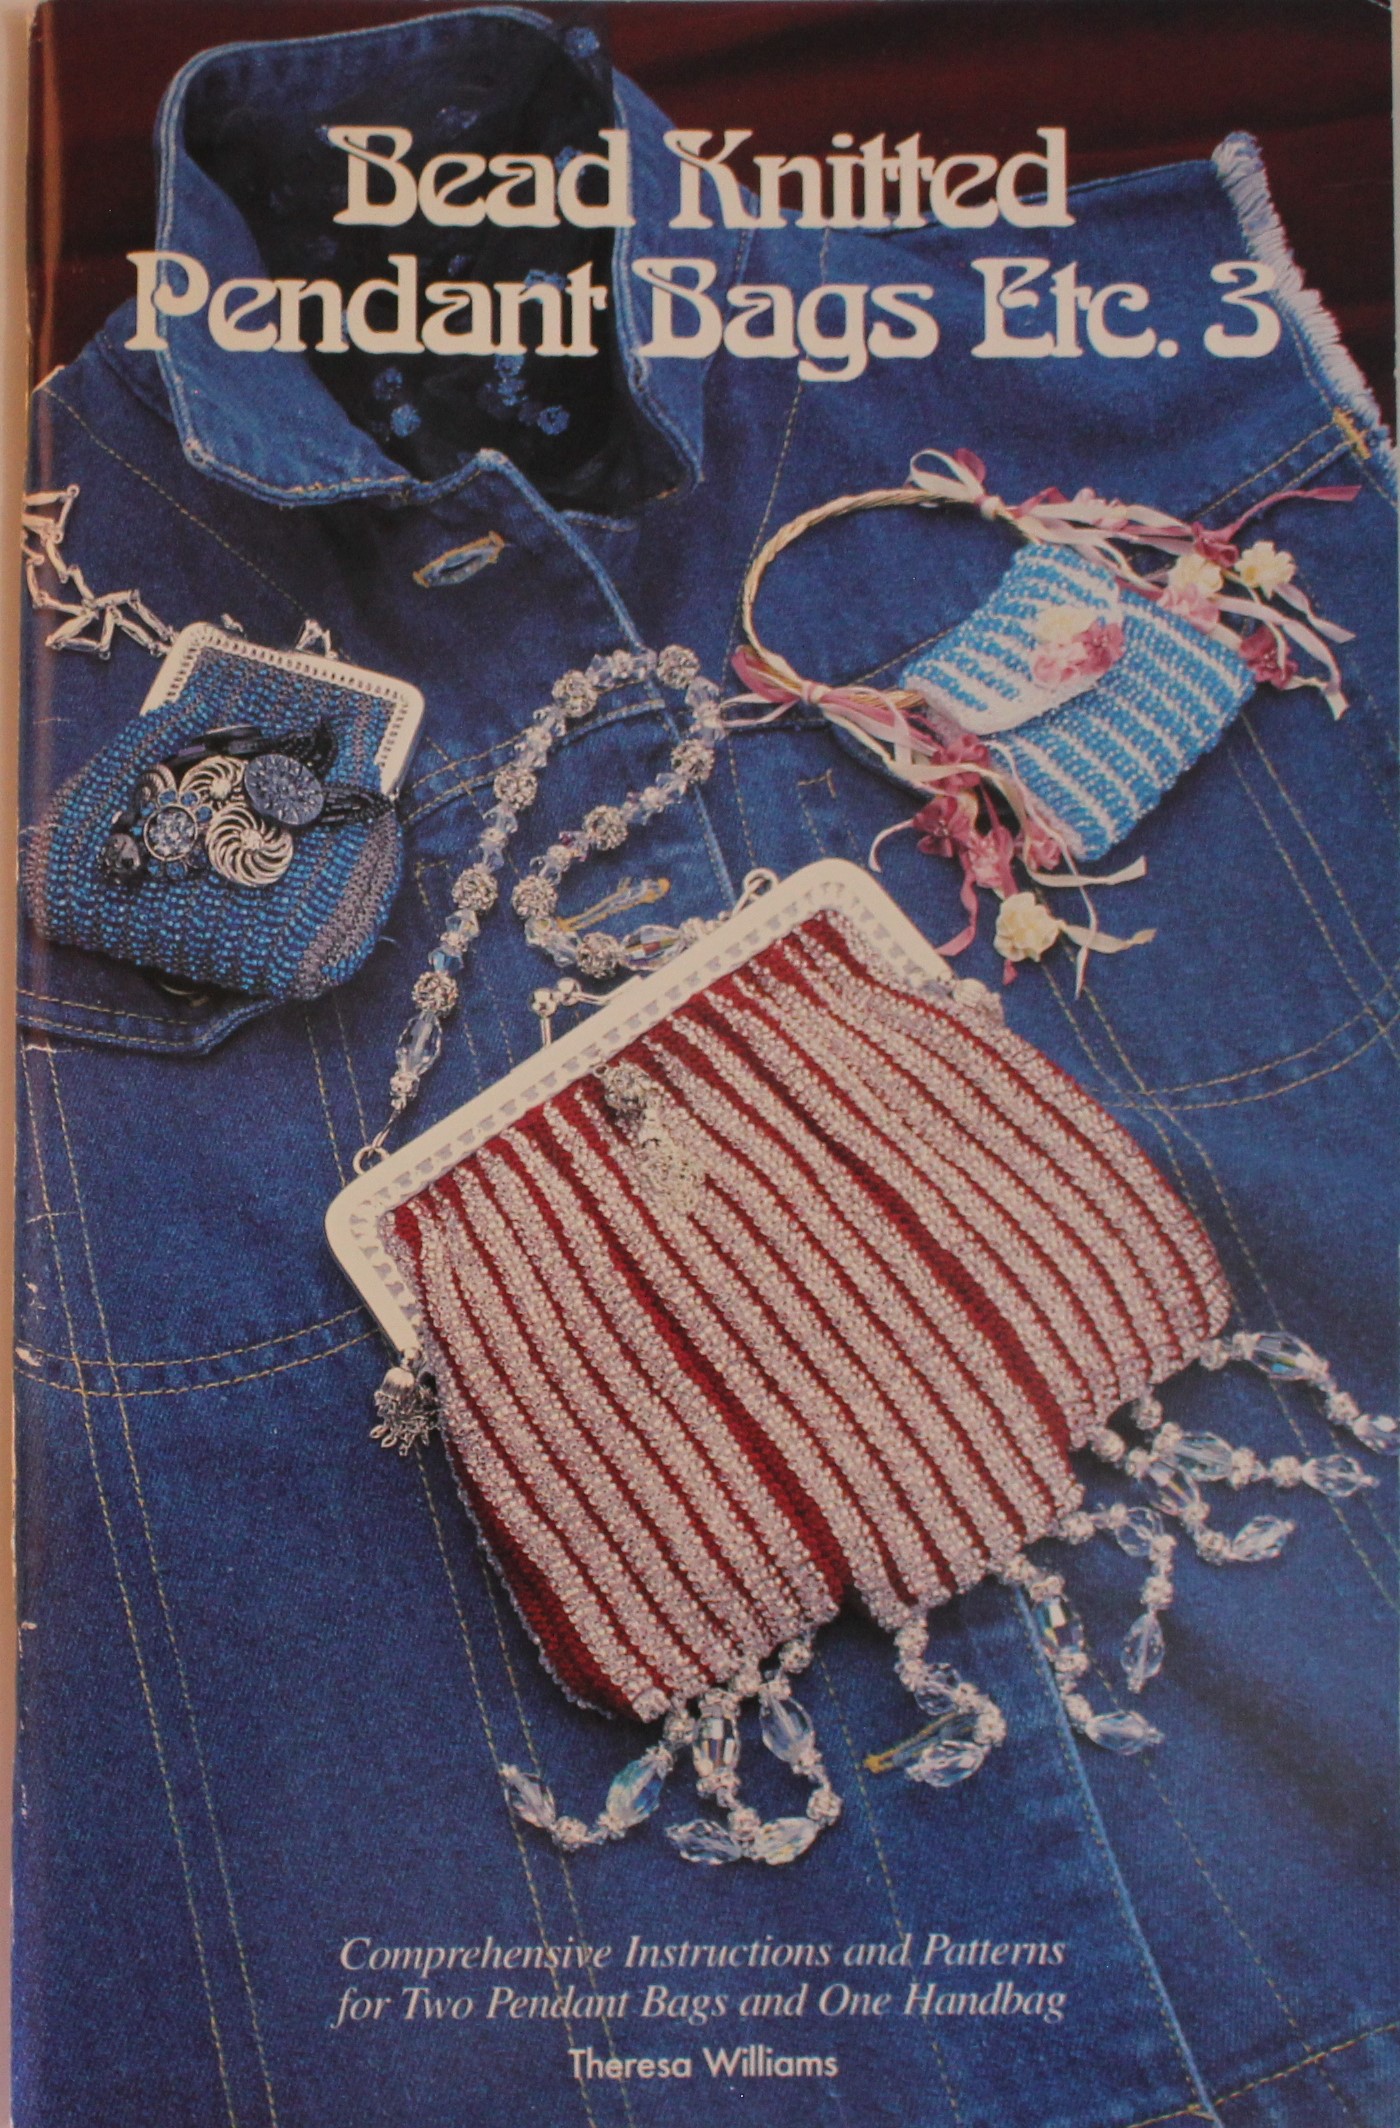 Bead Knitted Pendant Bags Etc Book 3